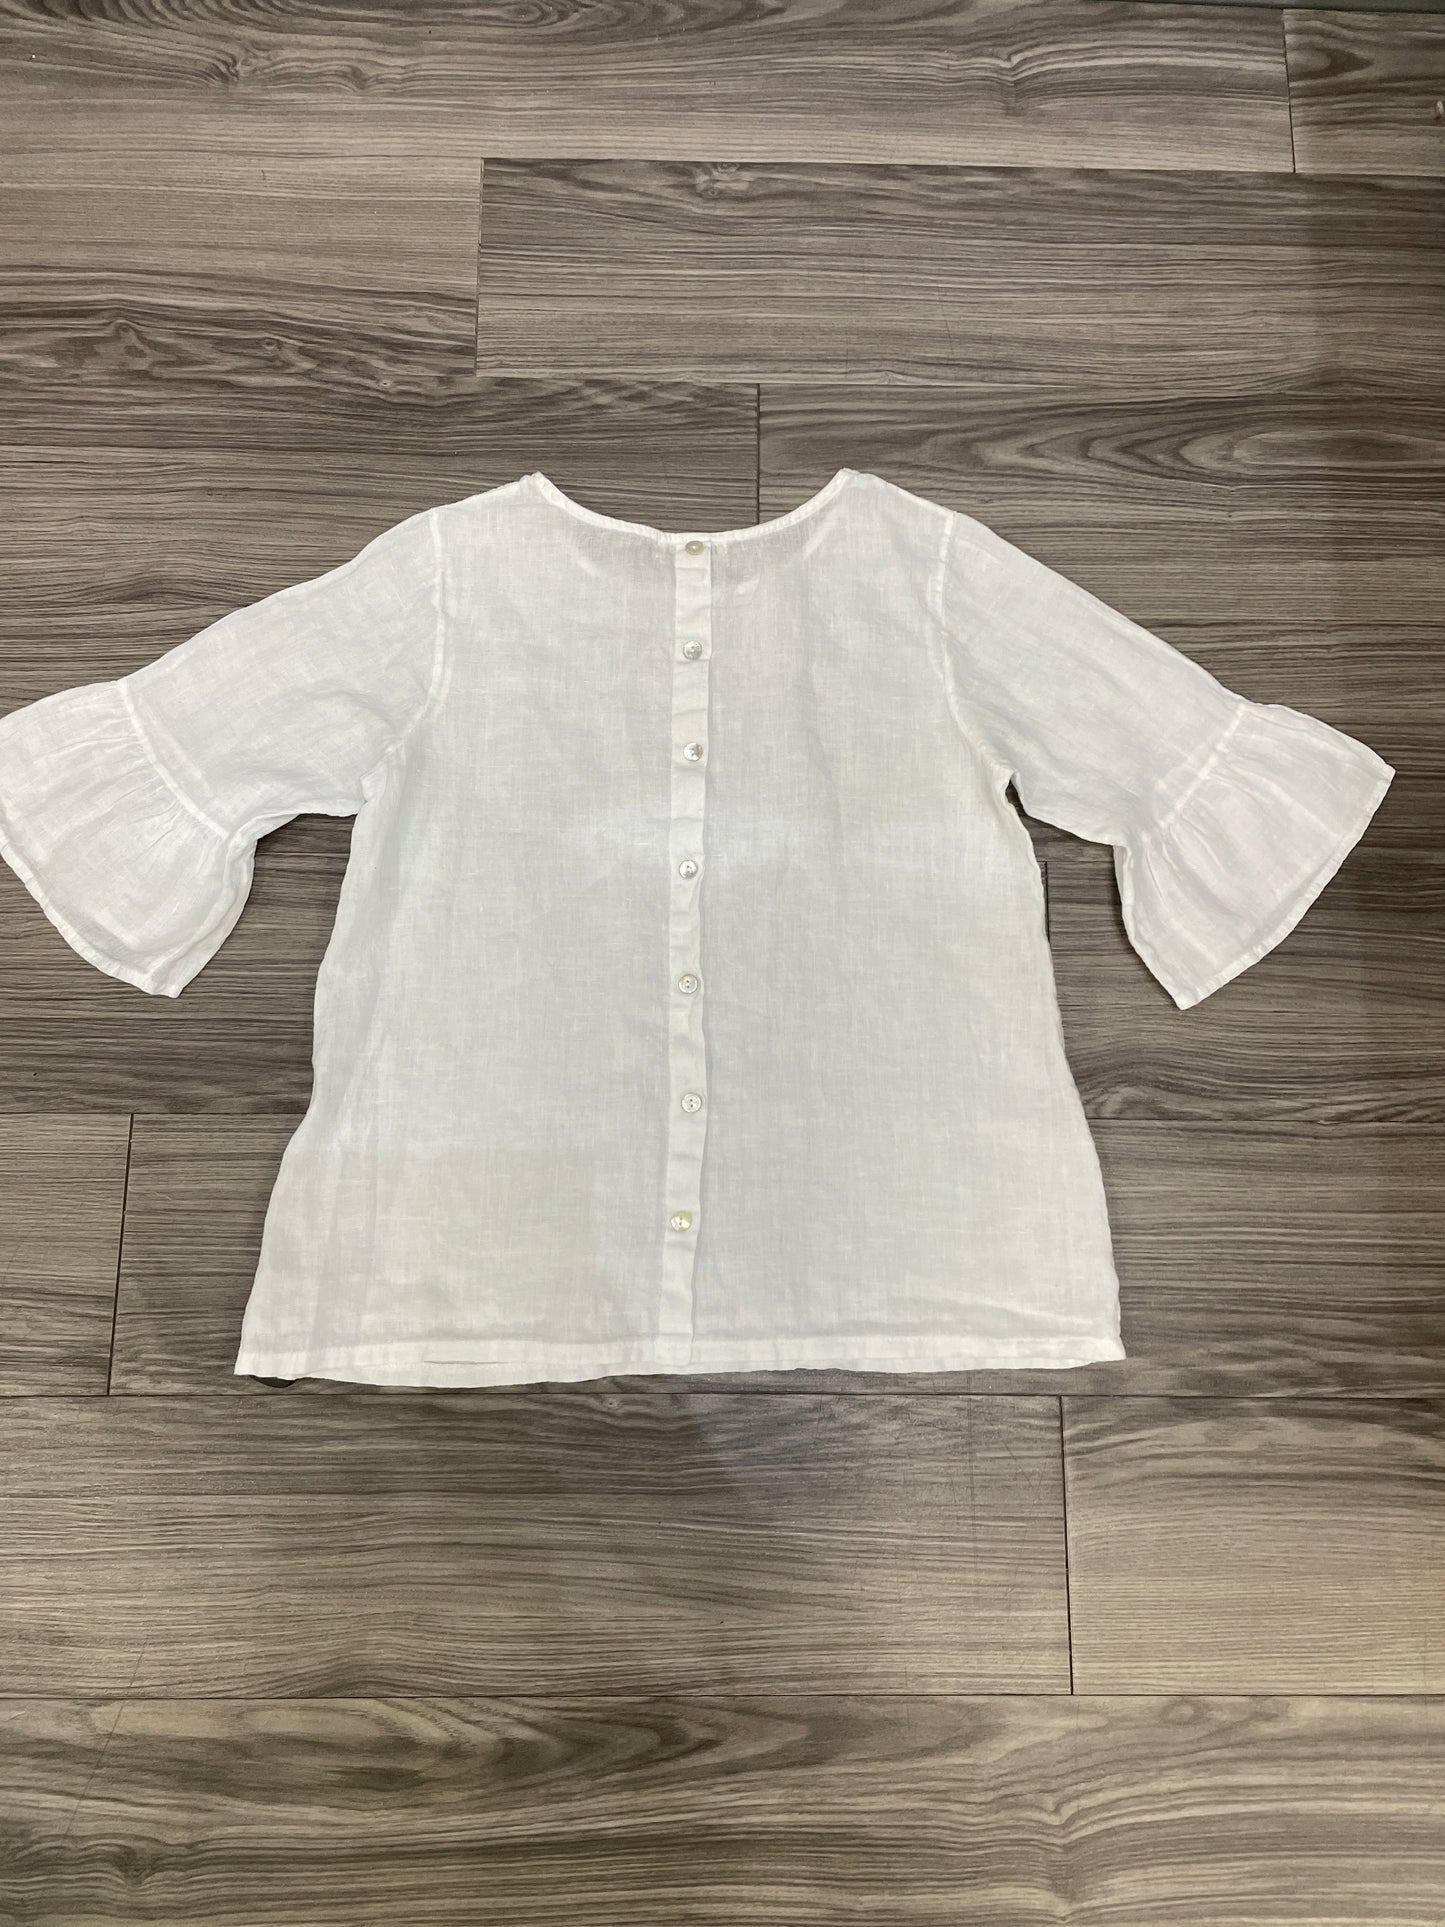 White Top 3/4 Sleeve Clothes Mentor, Size S